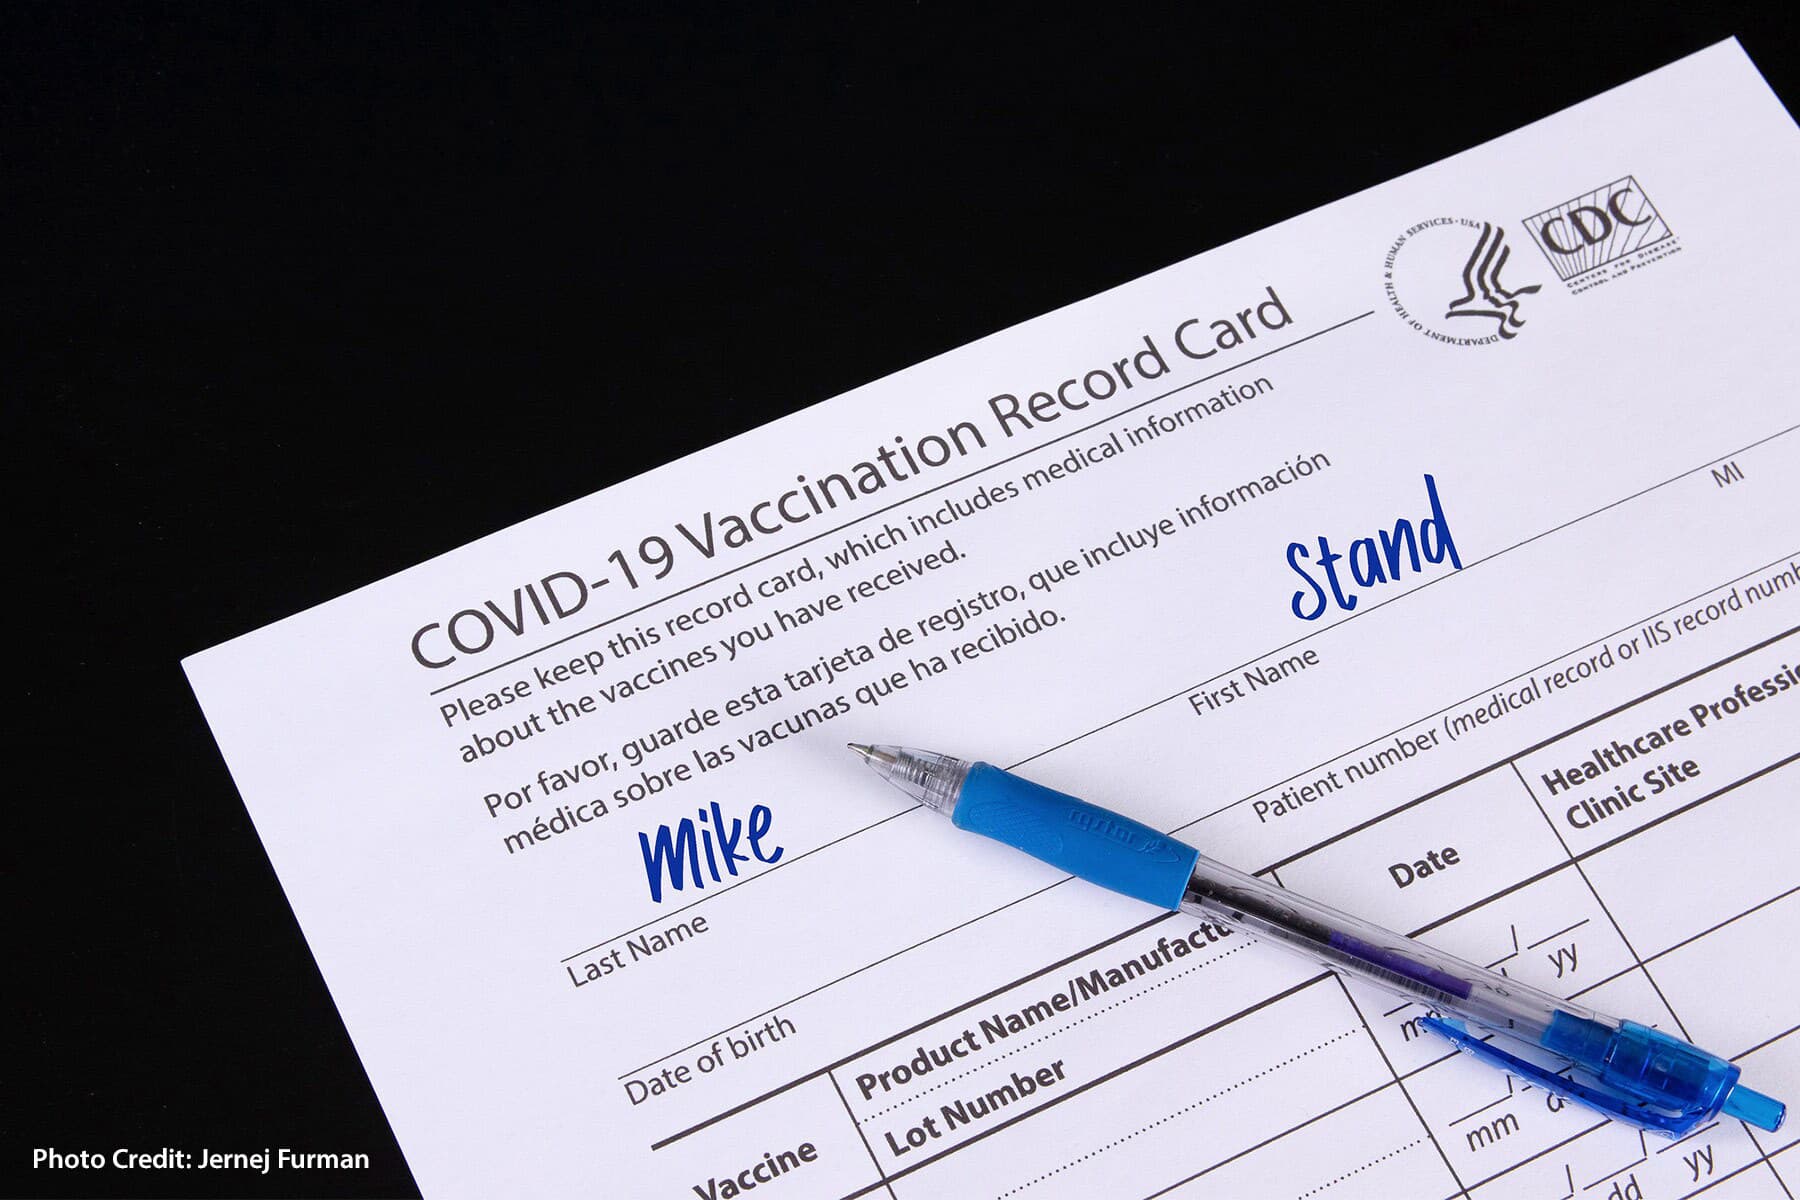 Two Women Charged in Mistaken COVID Vaccination Card Rip-off